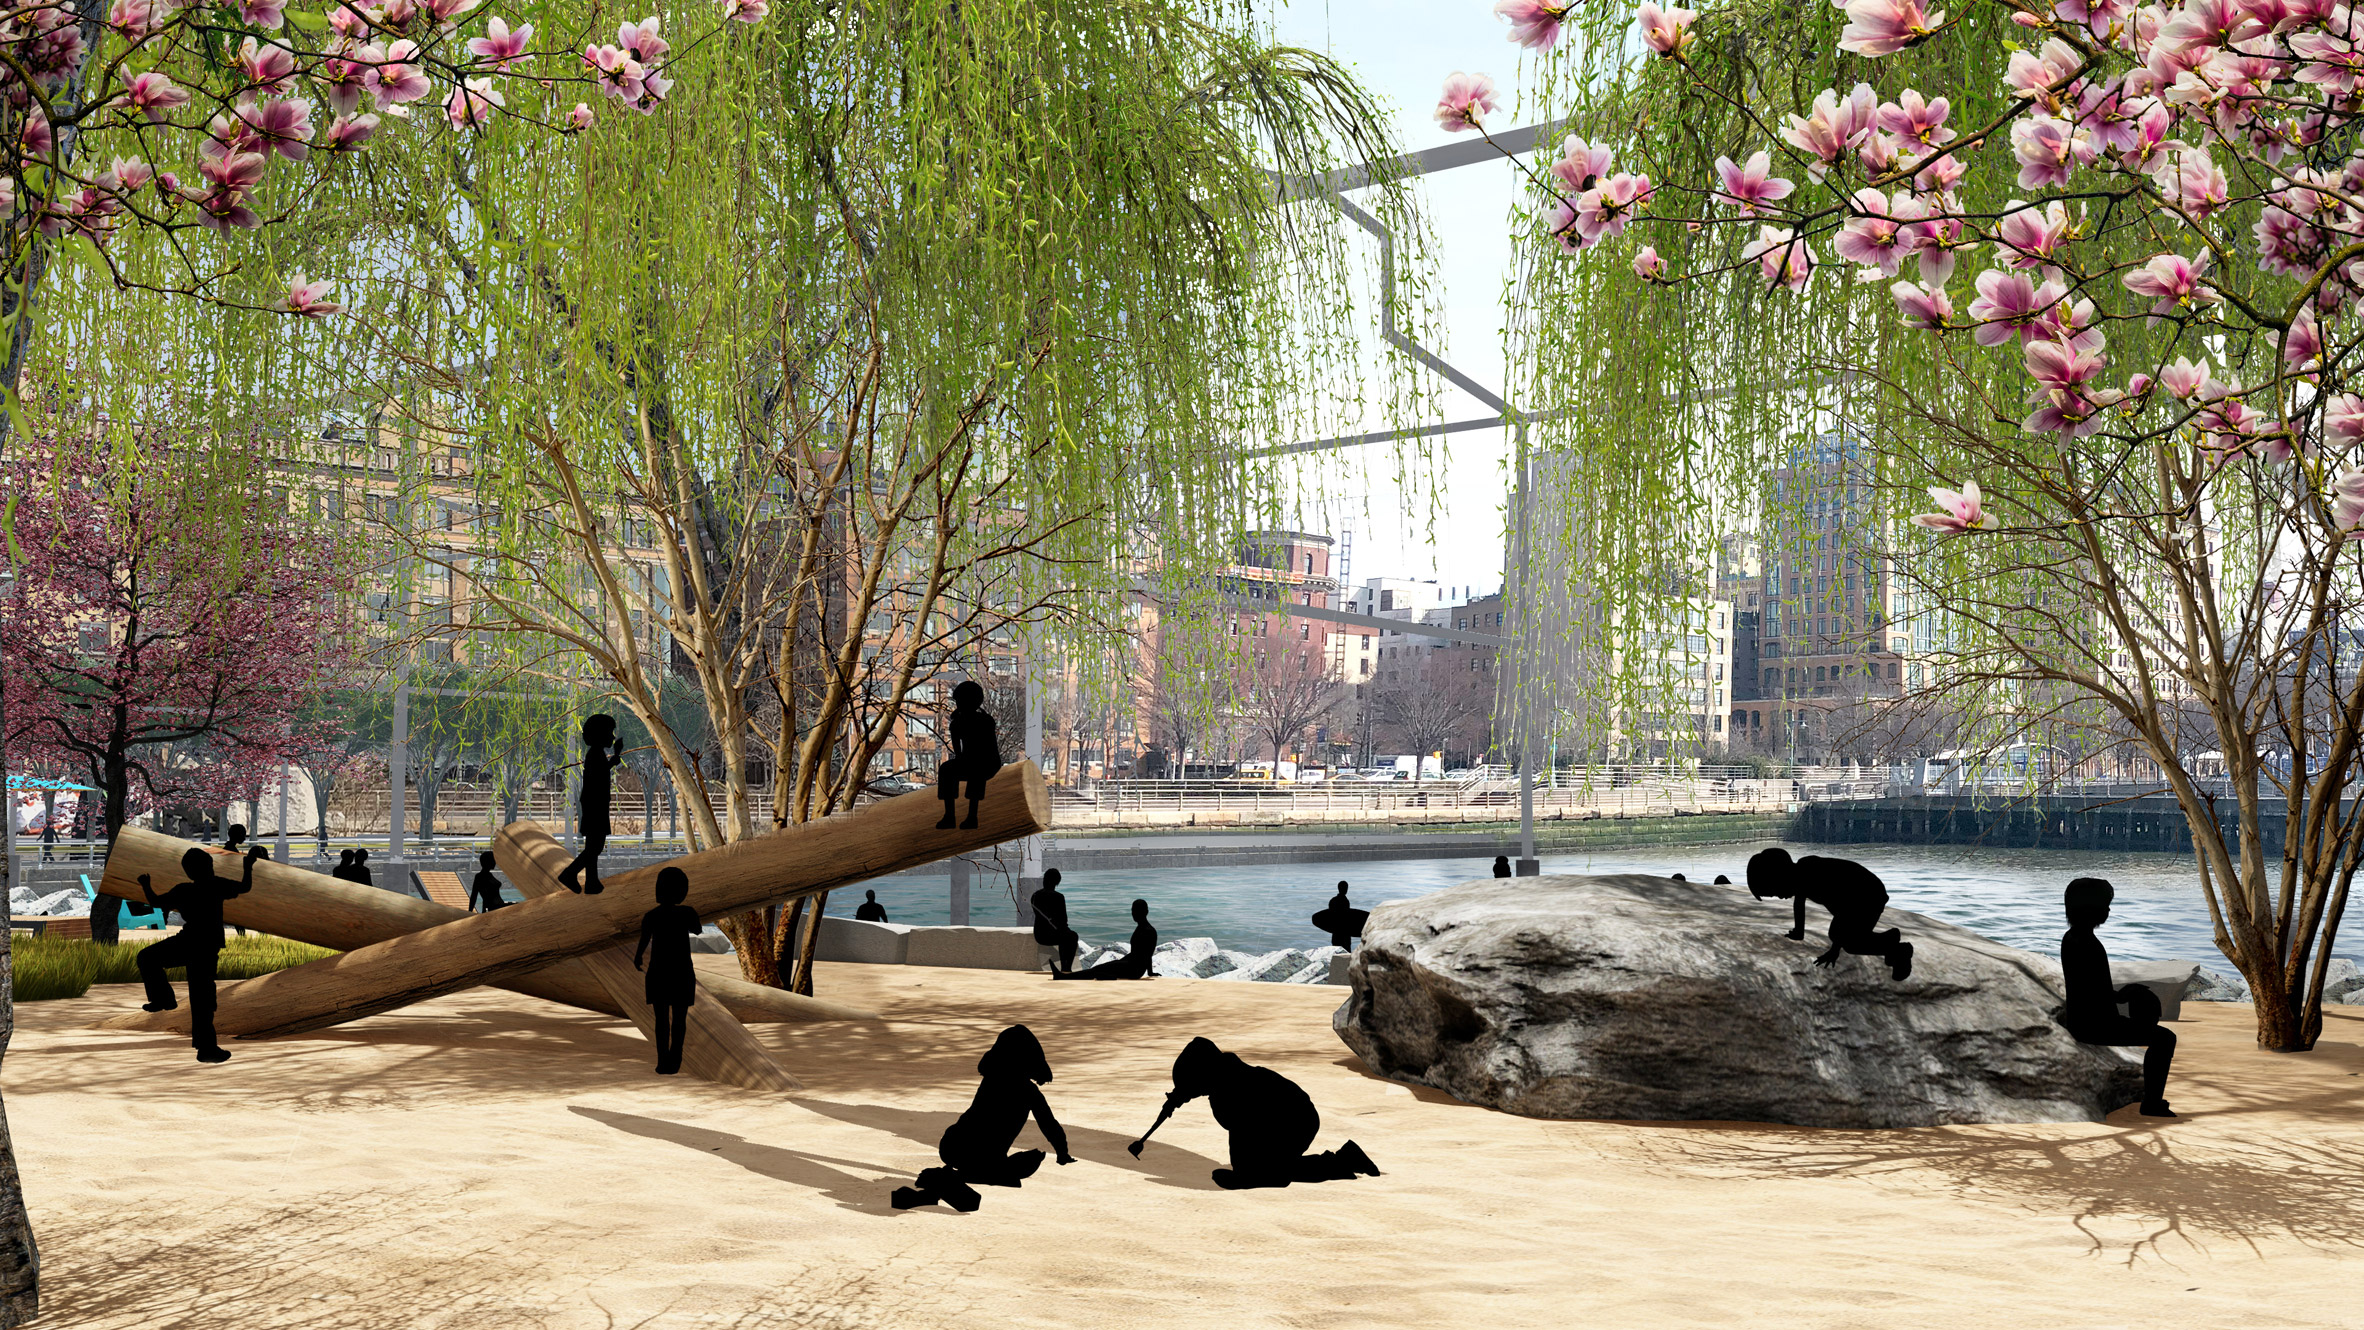 The project will feature Manhattan's first public beach